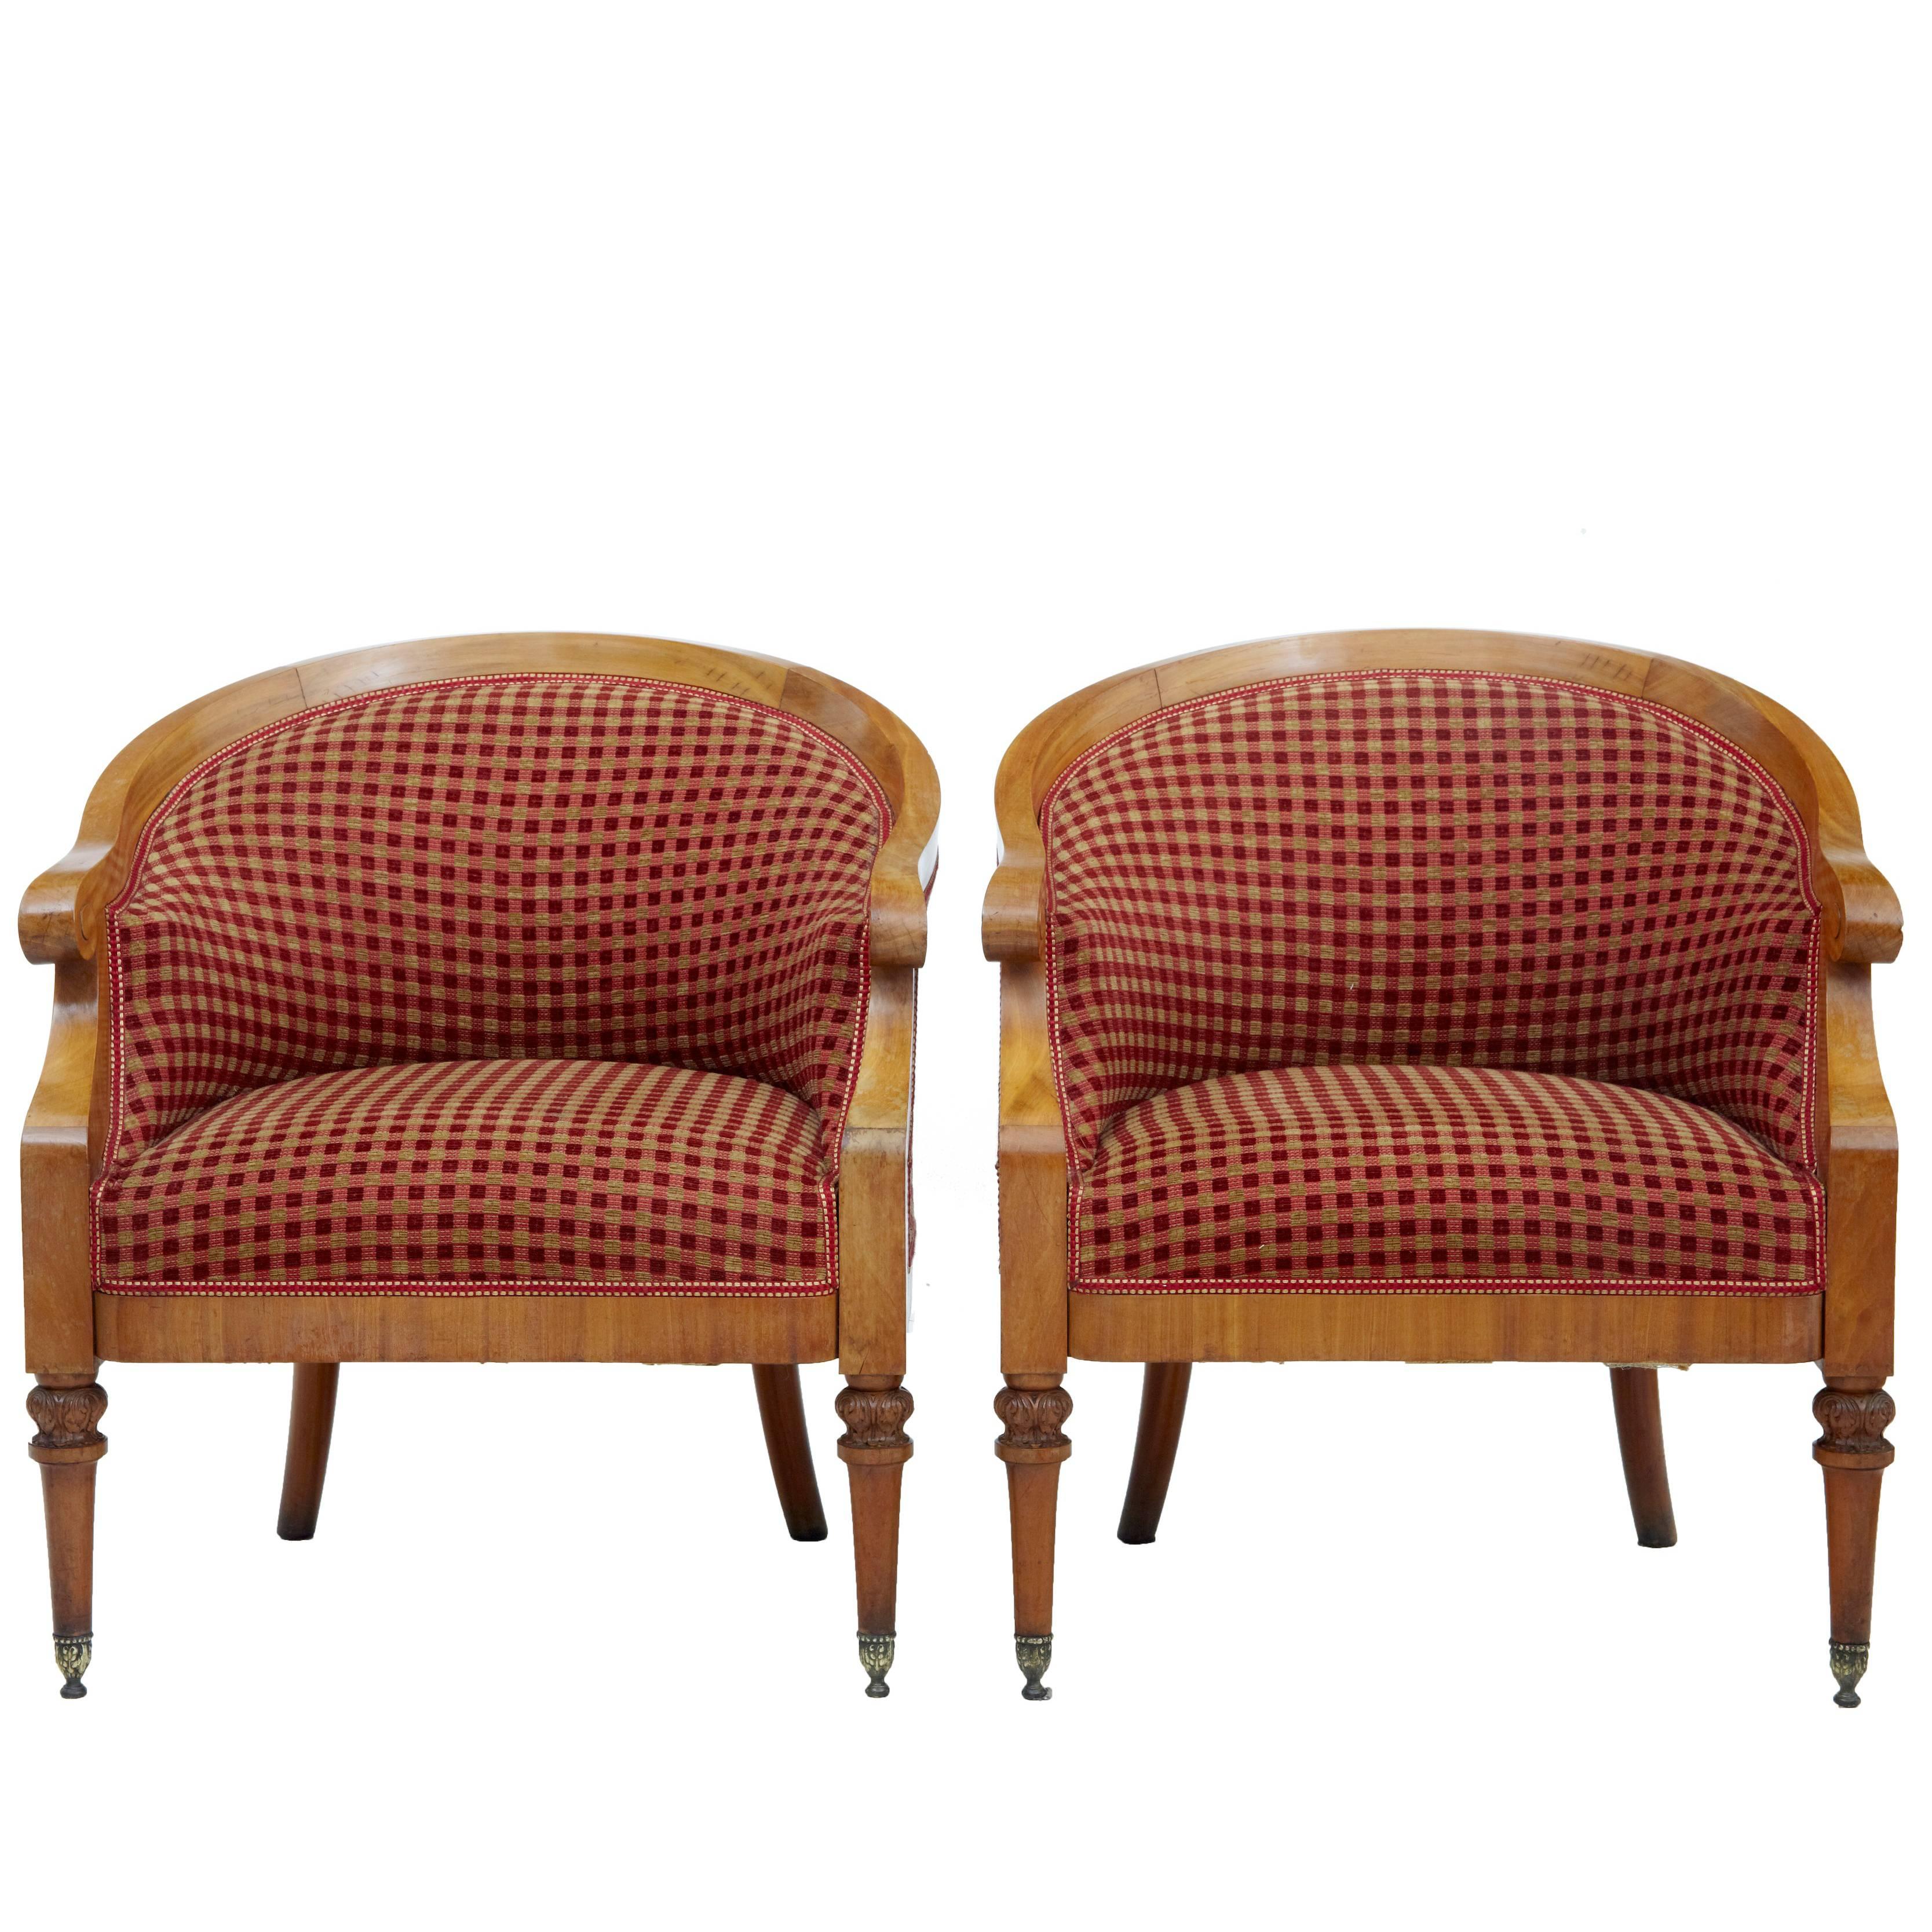 Pair of 1920s Fruitwood Tub Armchairs